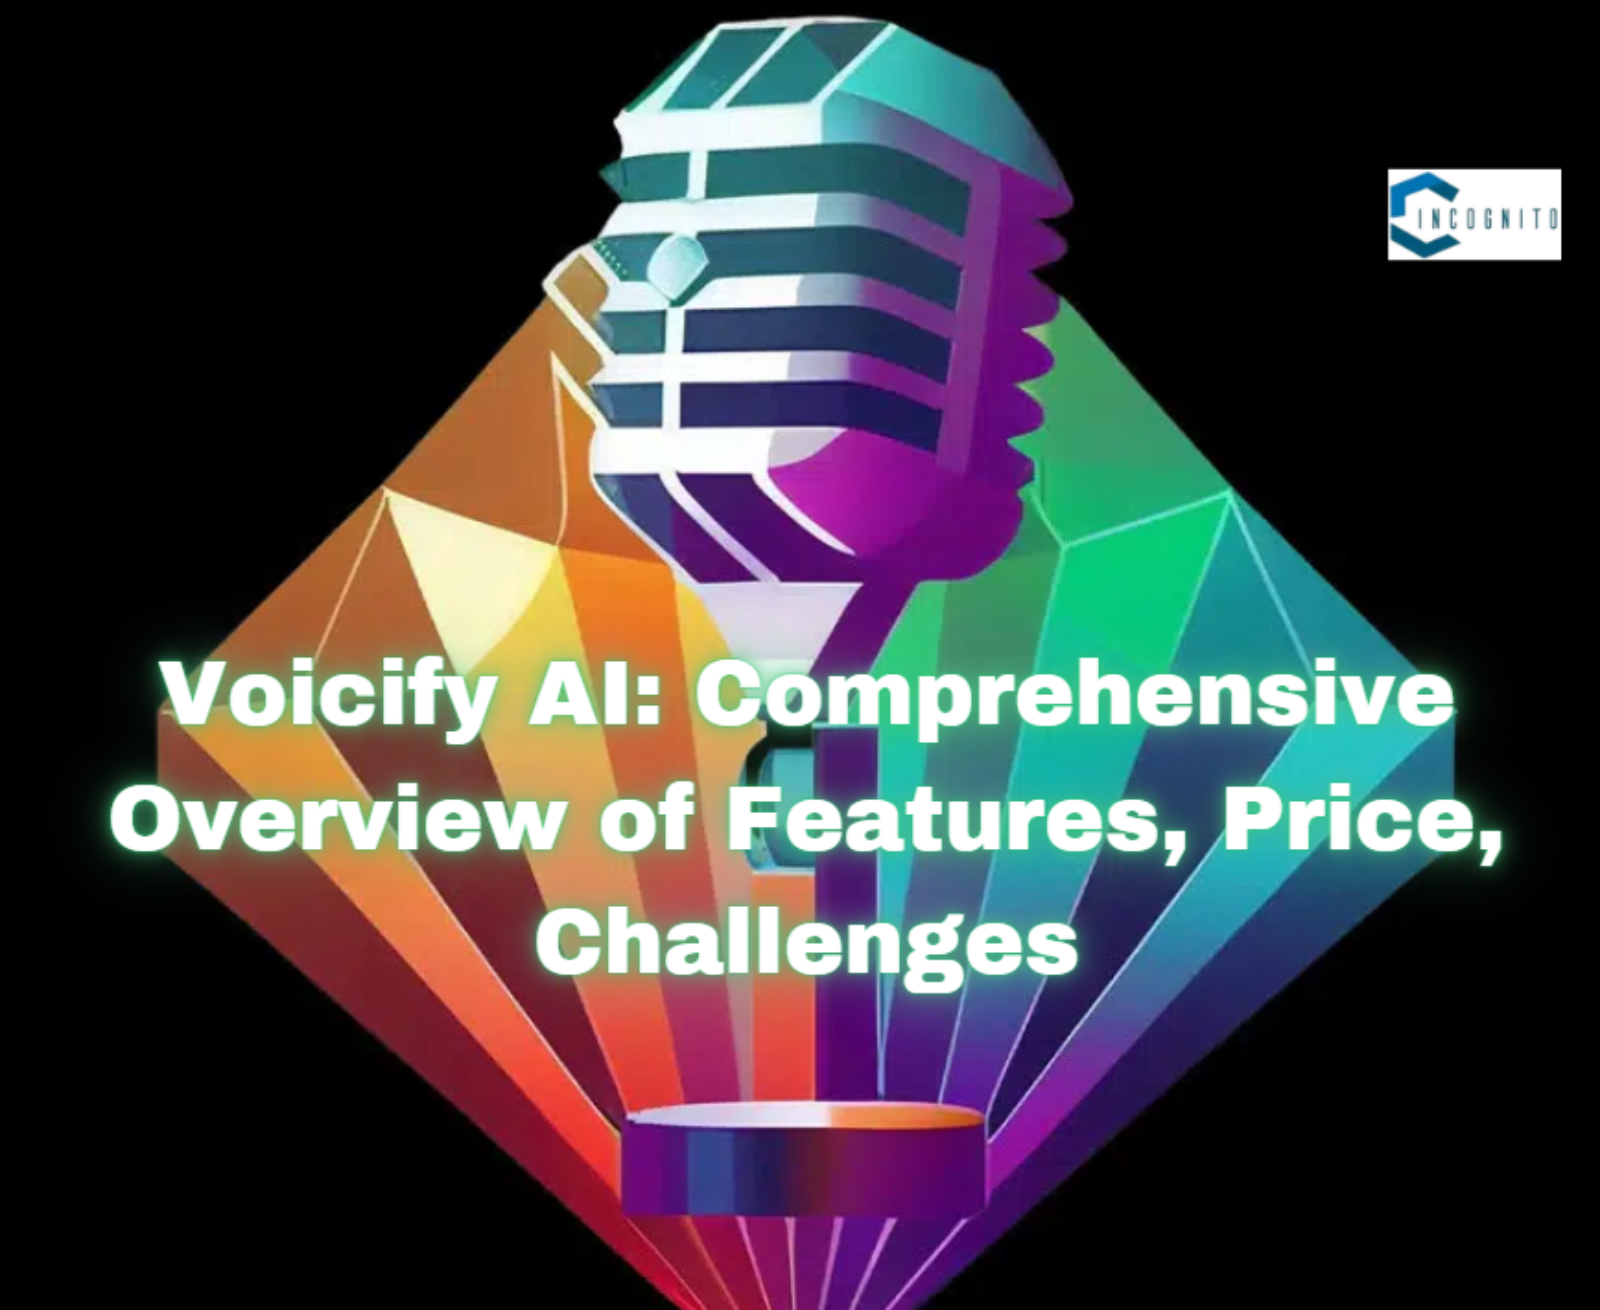 Voicify AI: Comprehensive Overview of Features, Price, Challenges and Use Cases